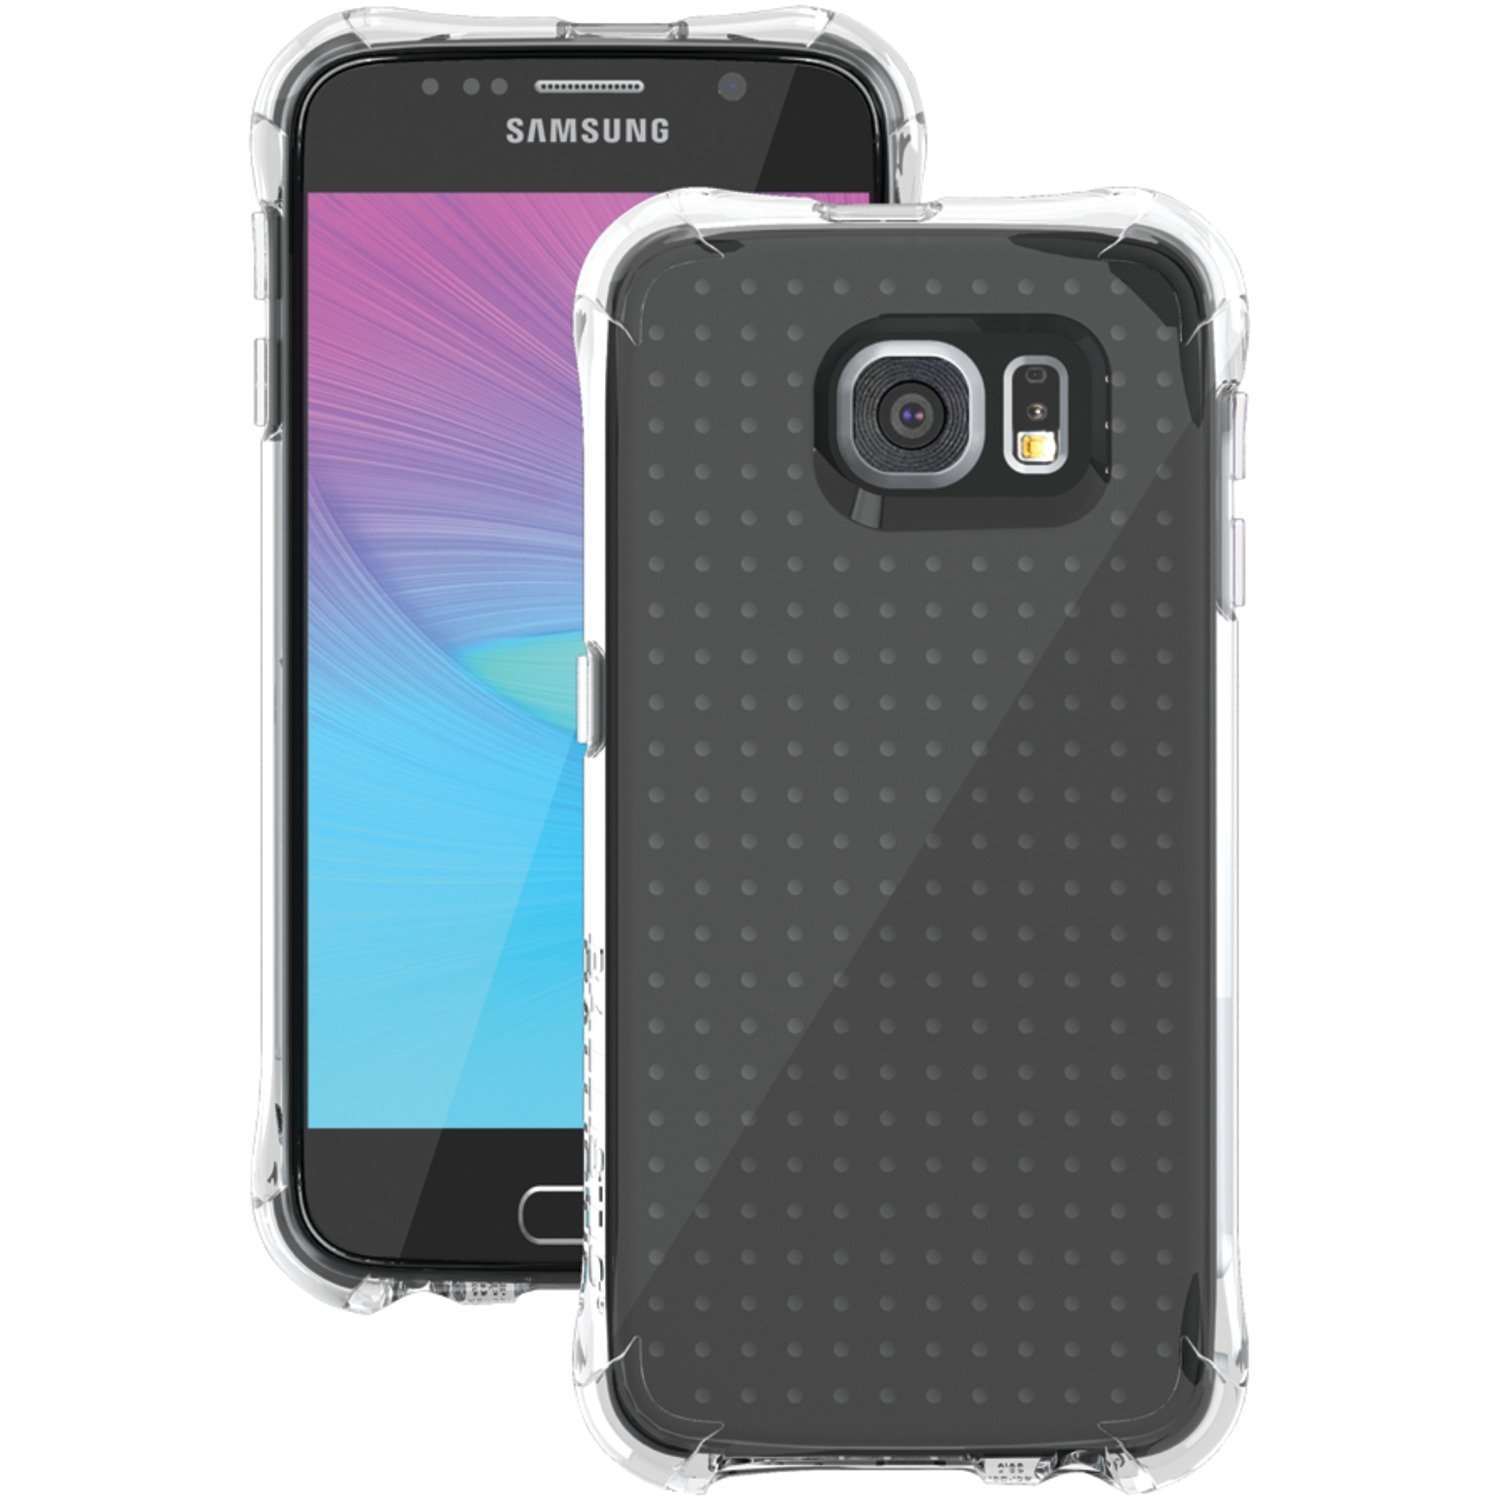 s6 cases, samsung galaxy s6 cases